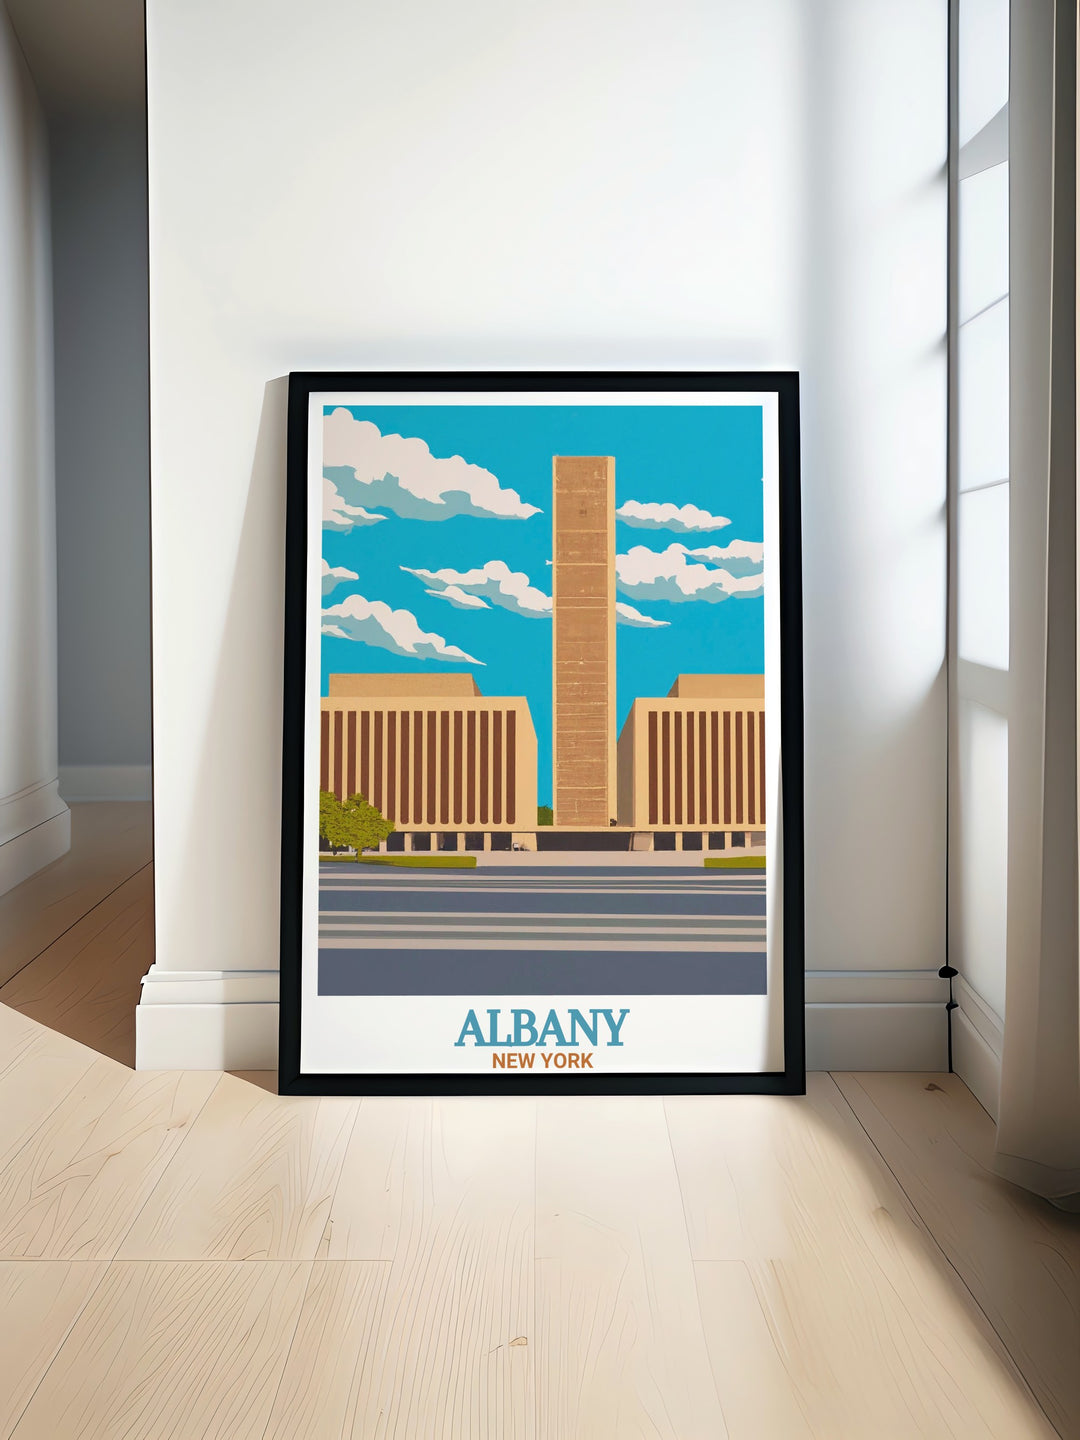 Empire State Plaza artwork showcasing Albanys iconic modernist architecture perfect for art and collectibles enthusiasts looking for stunning New York State prints and gifts that highlight the beauty of Albany decor and wall art.